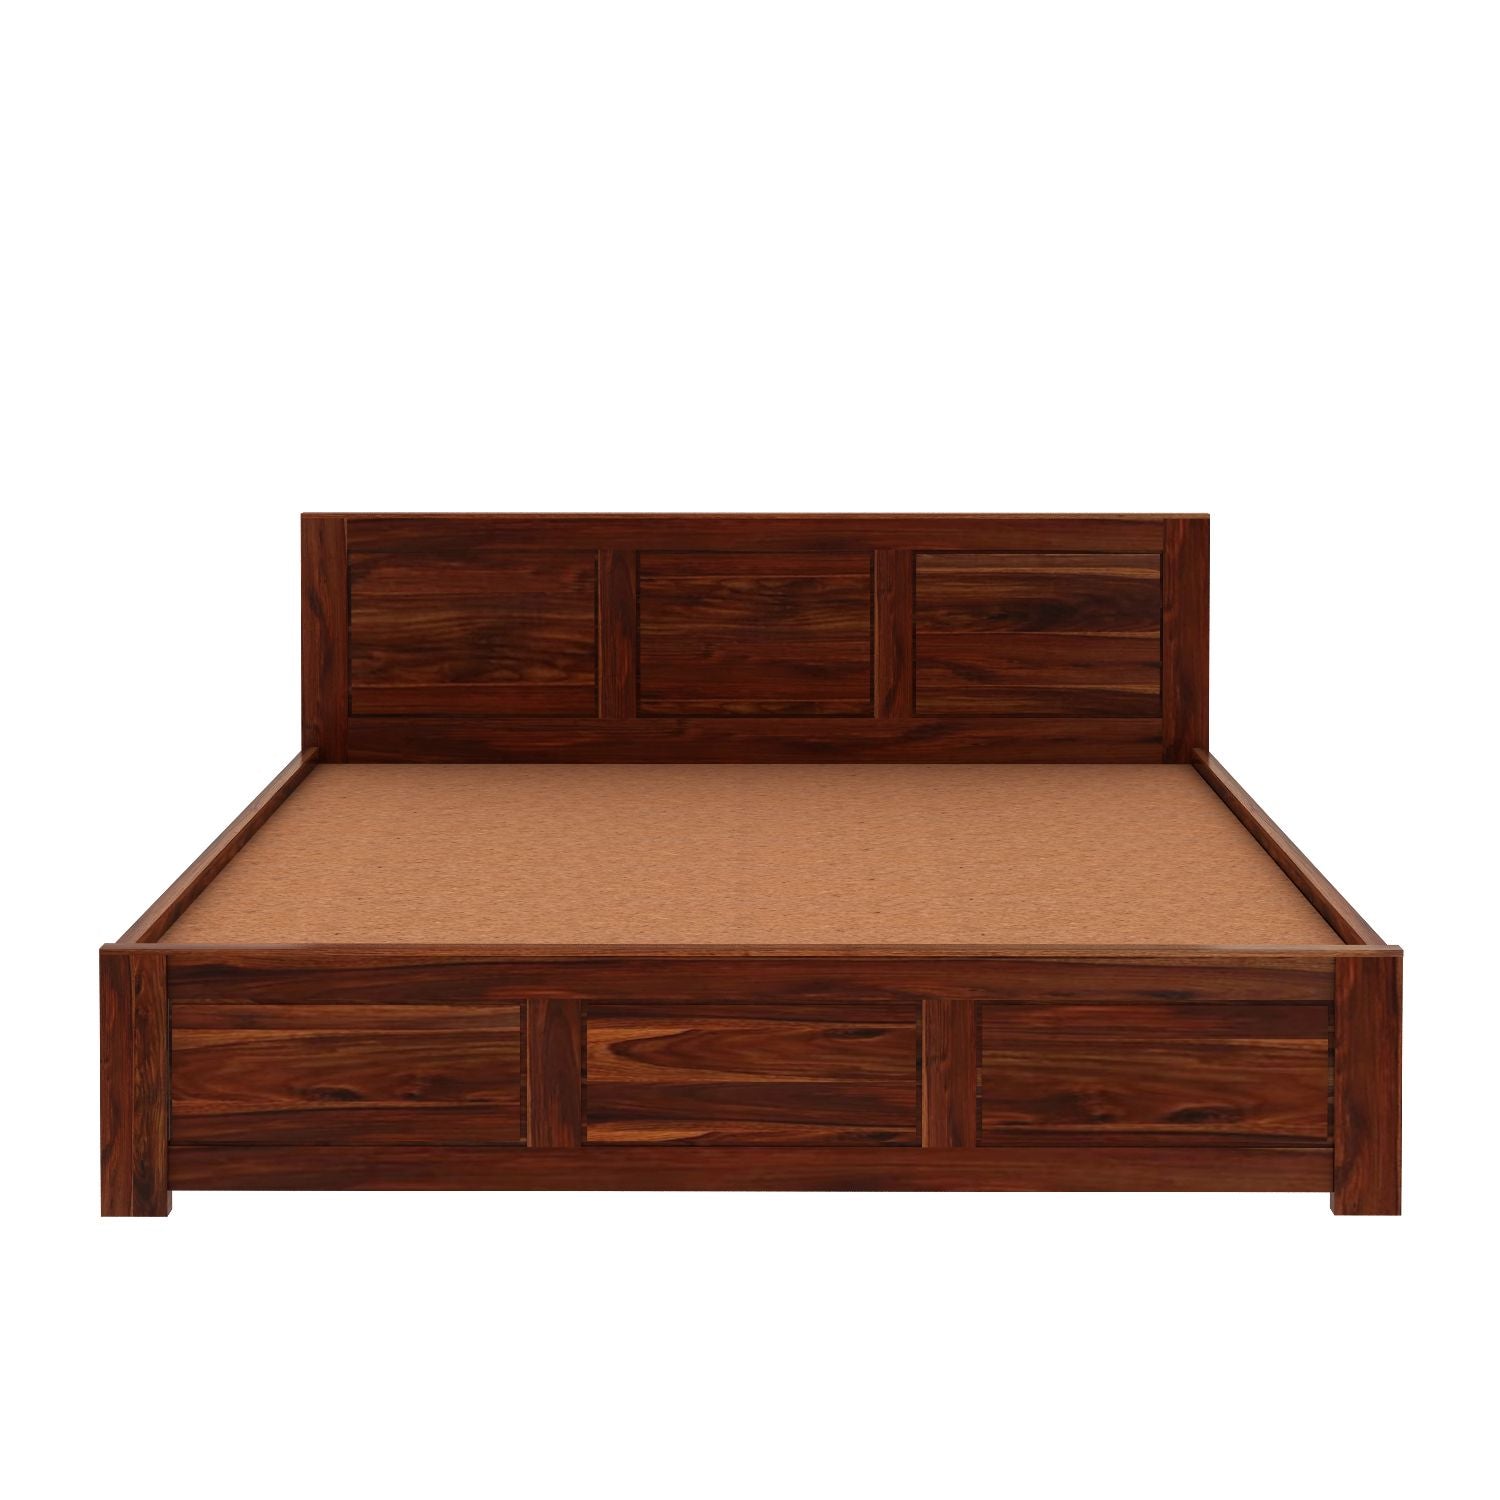 Woodwing Solid Sheesham Wood Hydraulic Bed With Box Storage (Queen Size, Natural Finish)